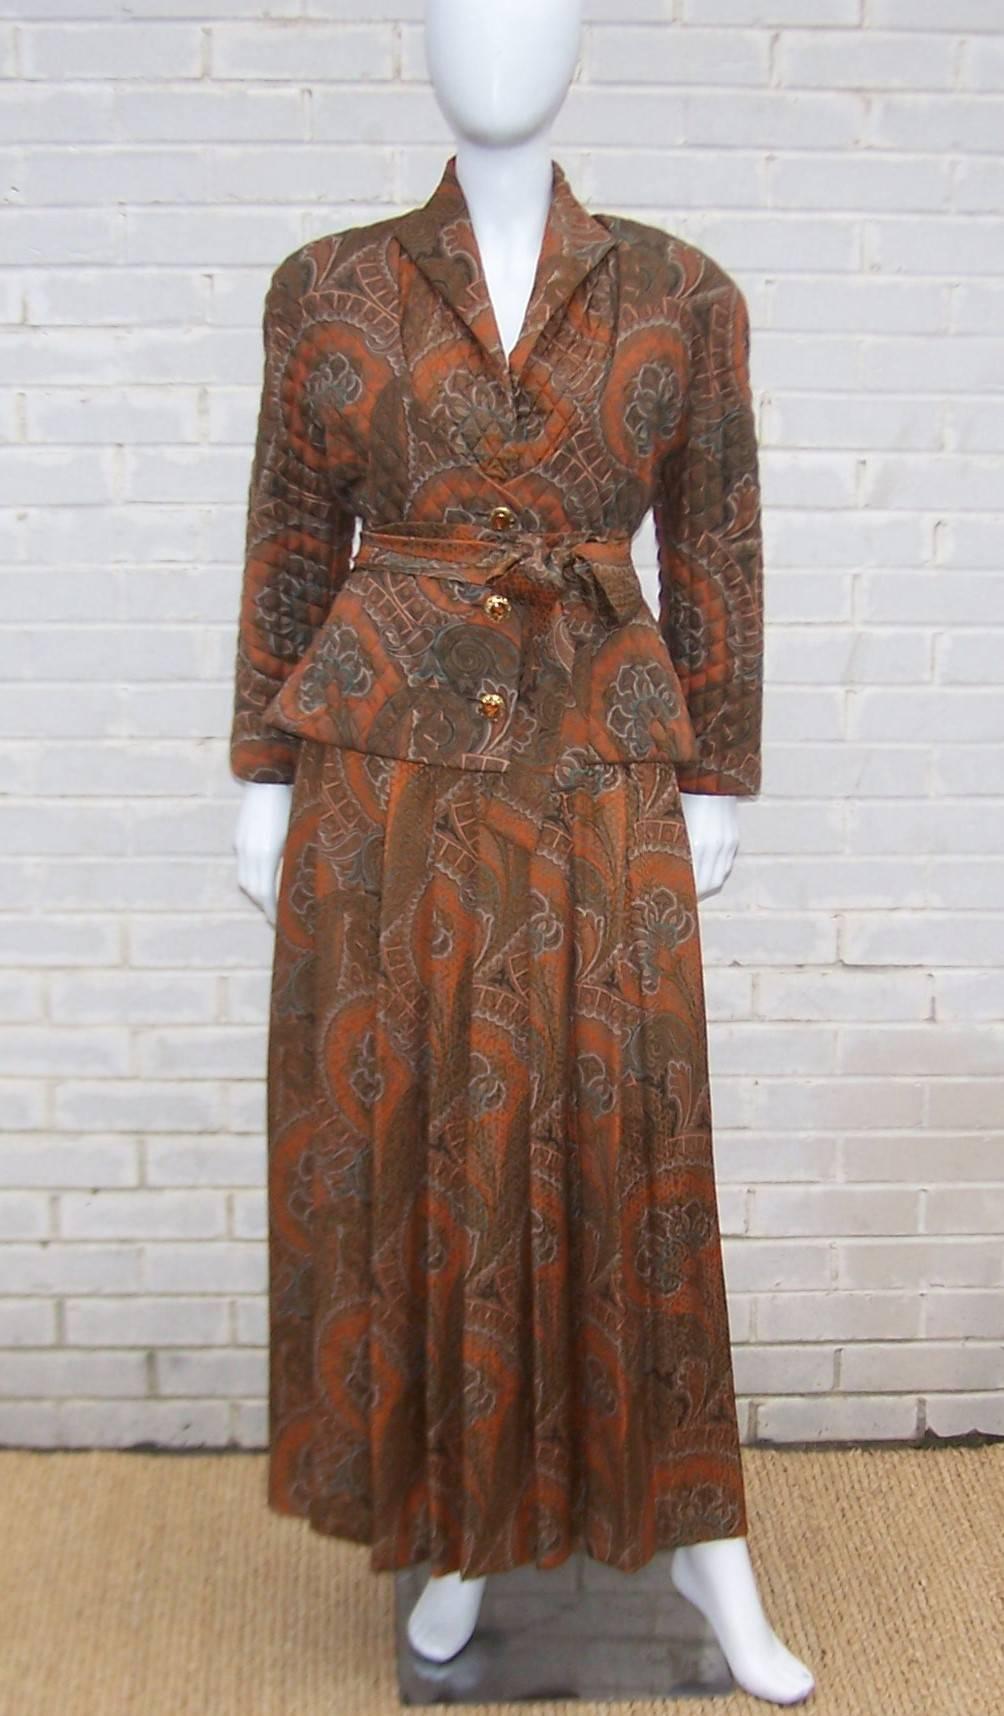 There are no less than four pieces to mix and match with this versatile Carolyne Roehm ensemble...maxi dress, jacket, cummerbund belt and sash.  All pieces are an English style paisley jacquard print in autumnal colors...browns, orange, turquoise